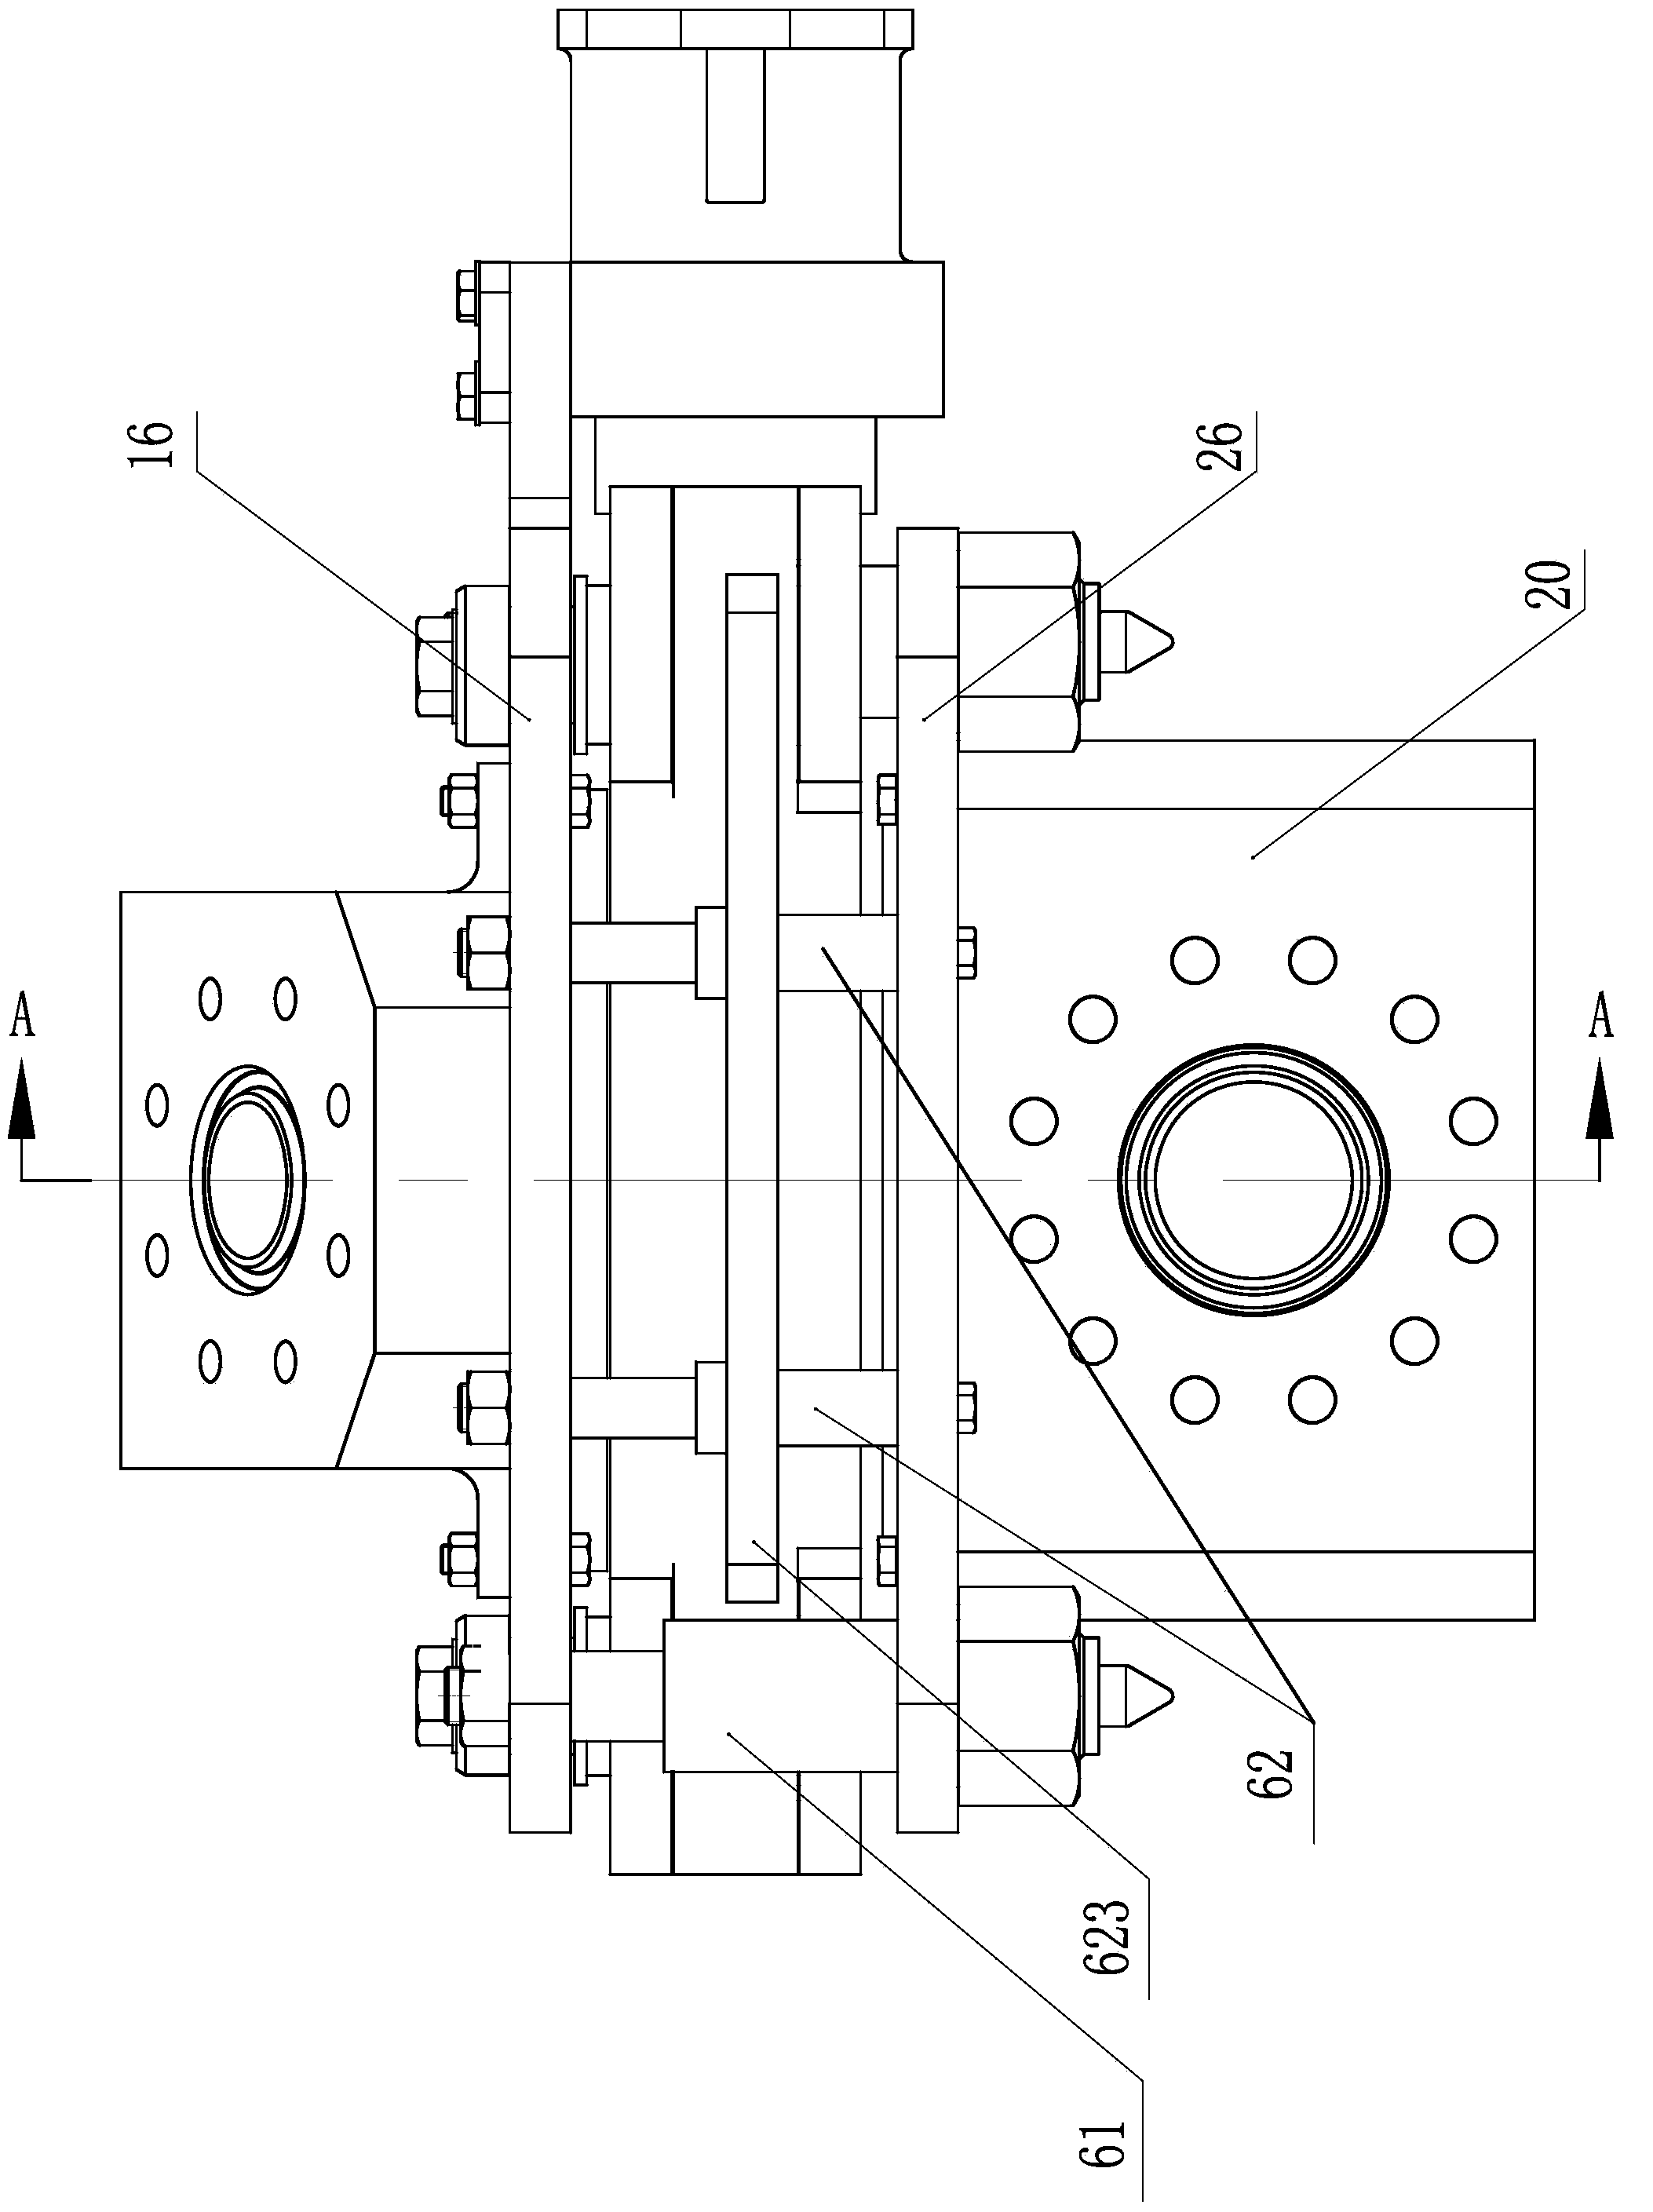 Mechanically controlled underwater dual-channel connecting and locking device